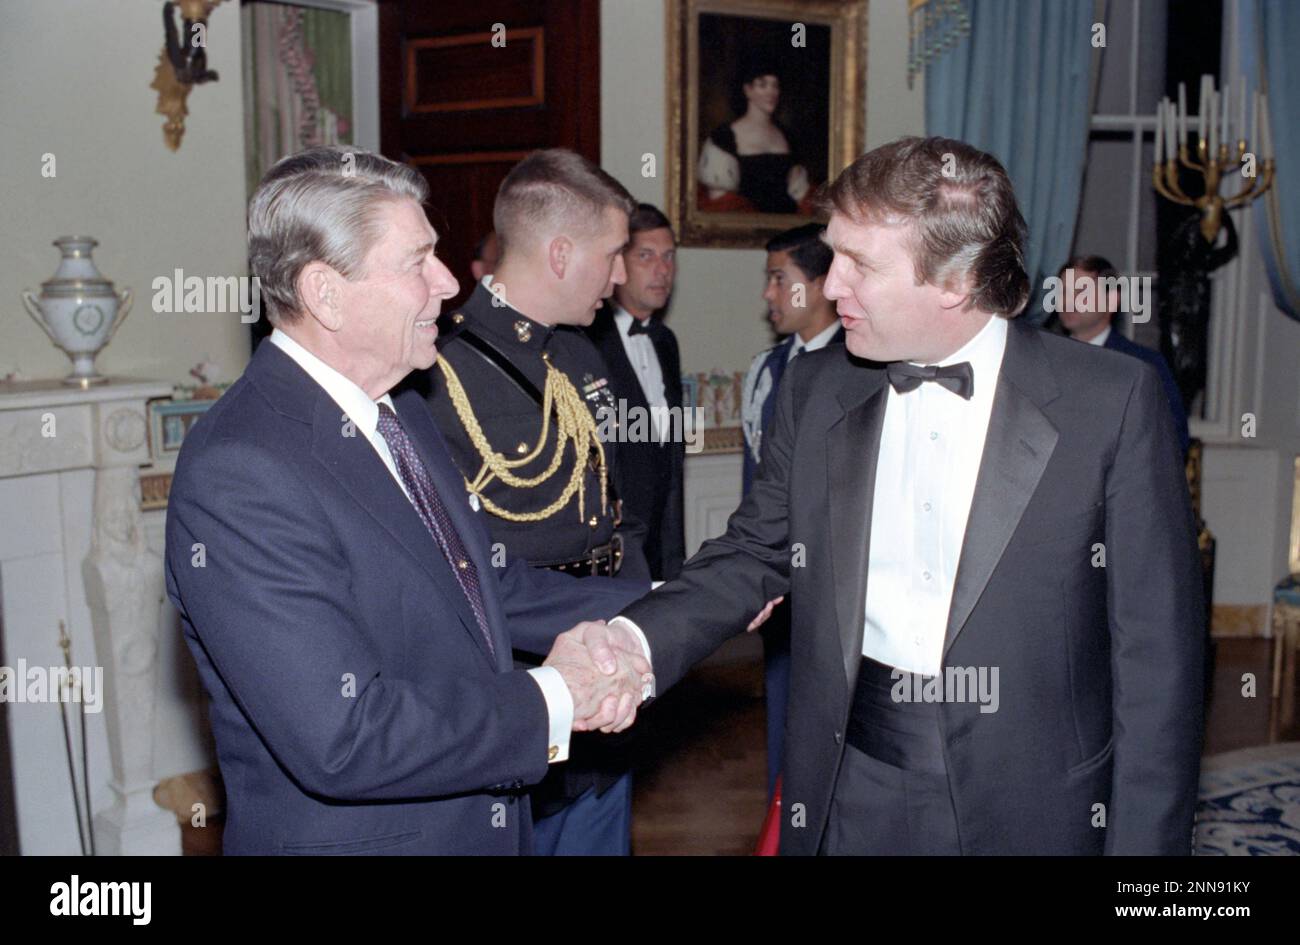 President Ronald Reagan shakes hands with Donald Trump at a reception for members of the 'Friends of Art and Preservation in Embassies' Foundation in the White House's Blue Room, Washington, DC, 11/3/1987. (Photo by White House Photo Office Stock Photo